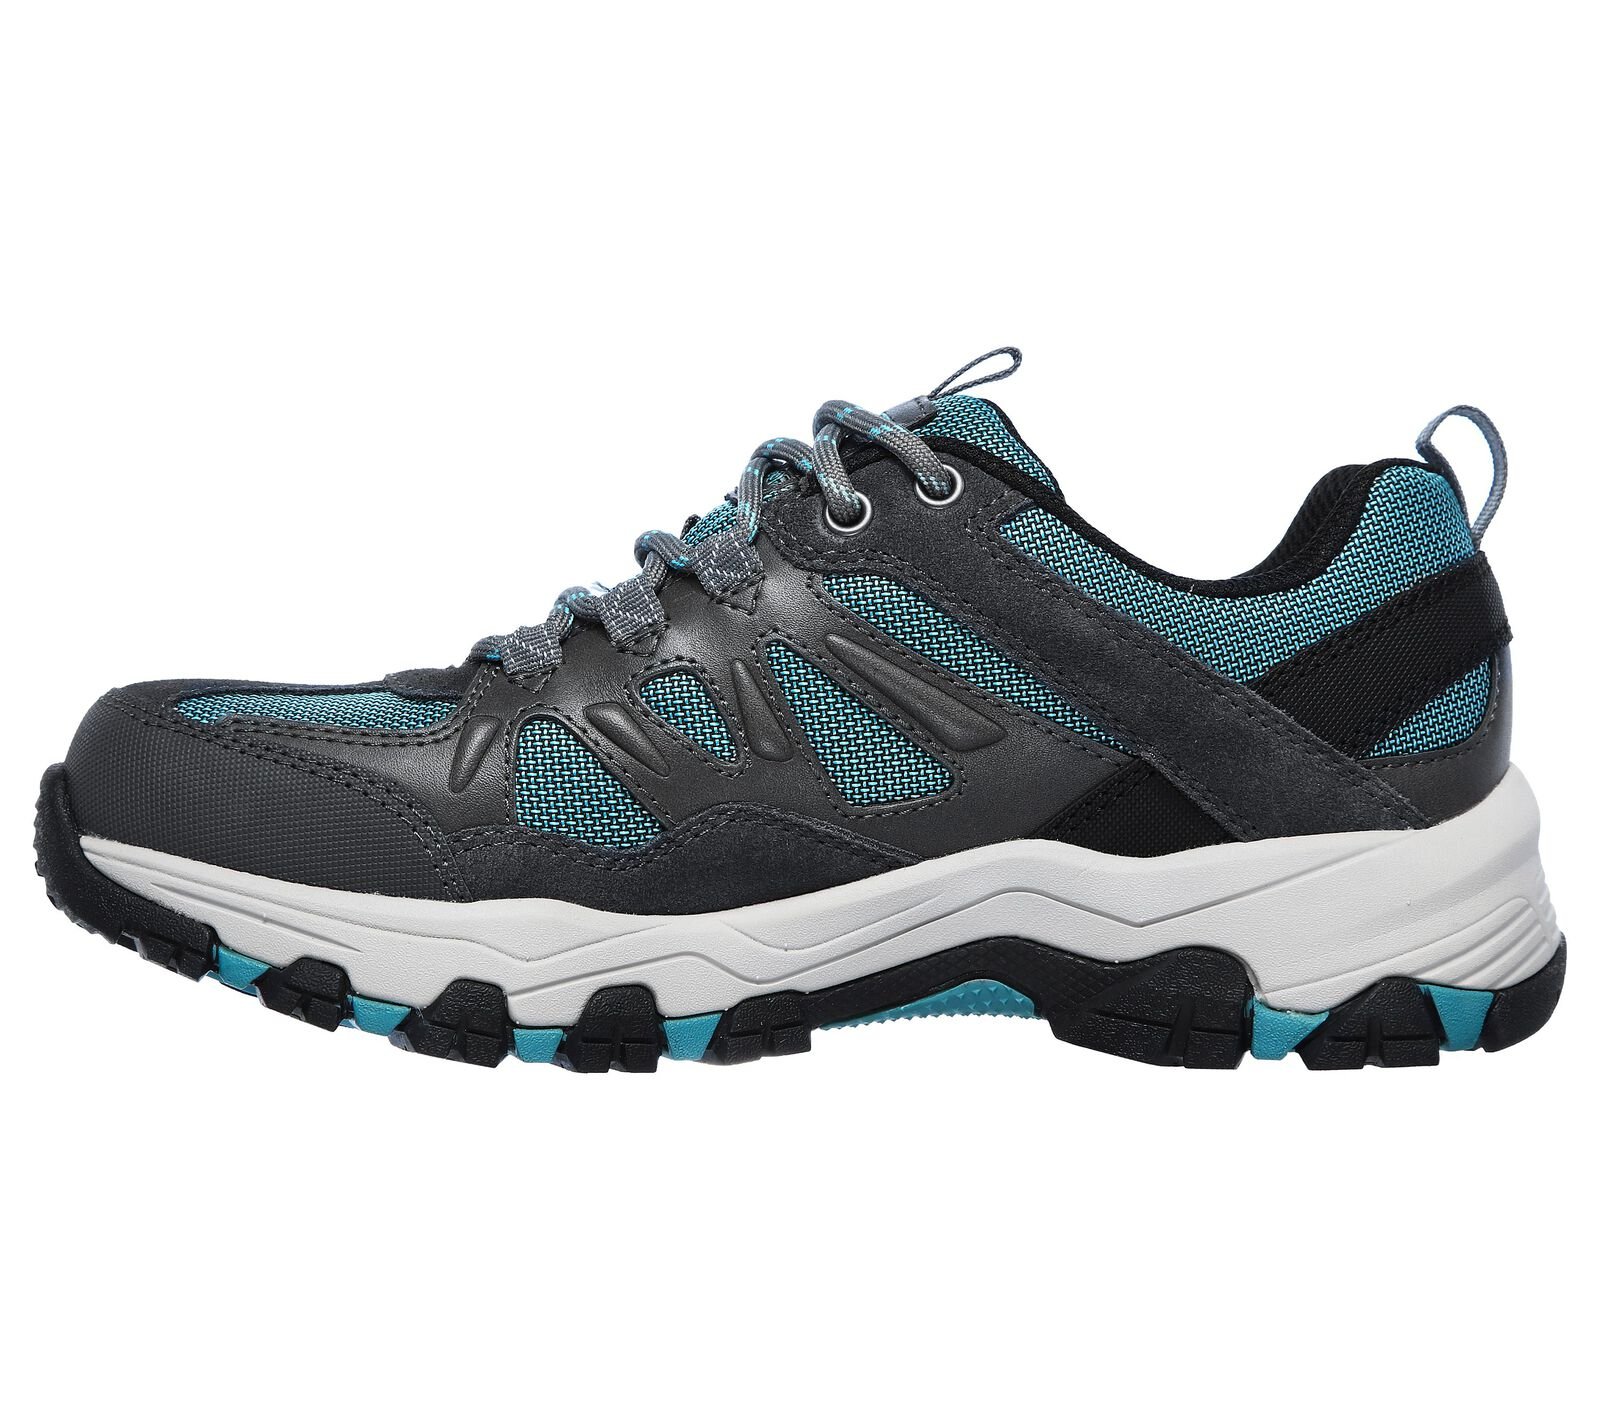 Shop the Relaxed Fit: Selmen - West Highland | SKECHERS CA